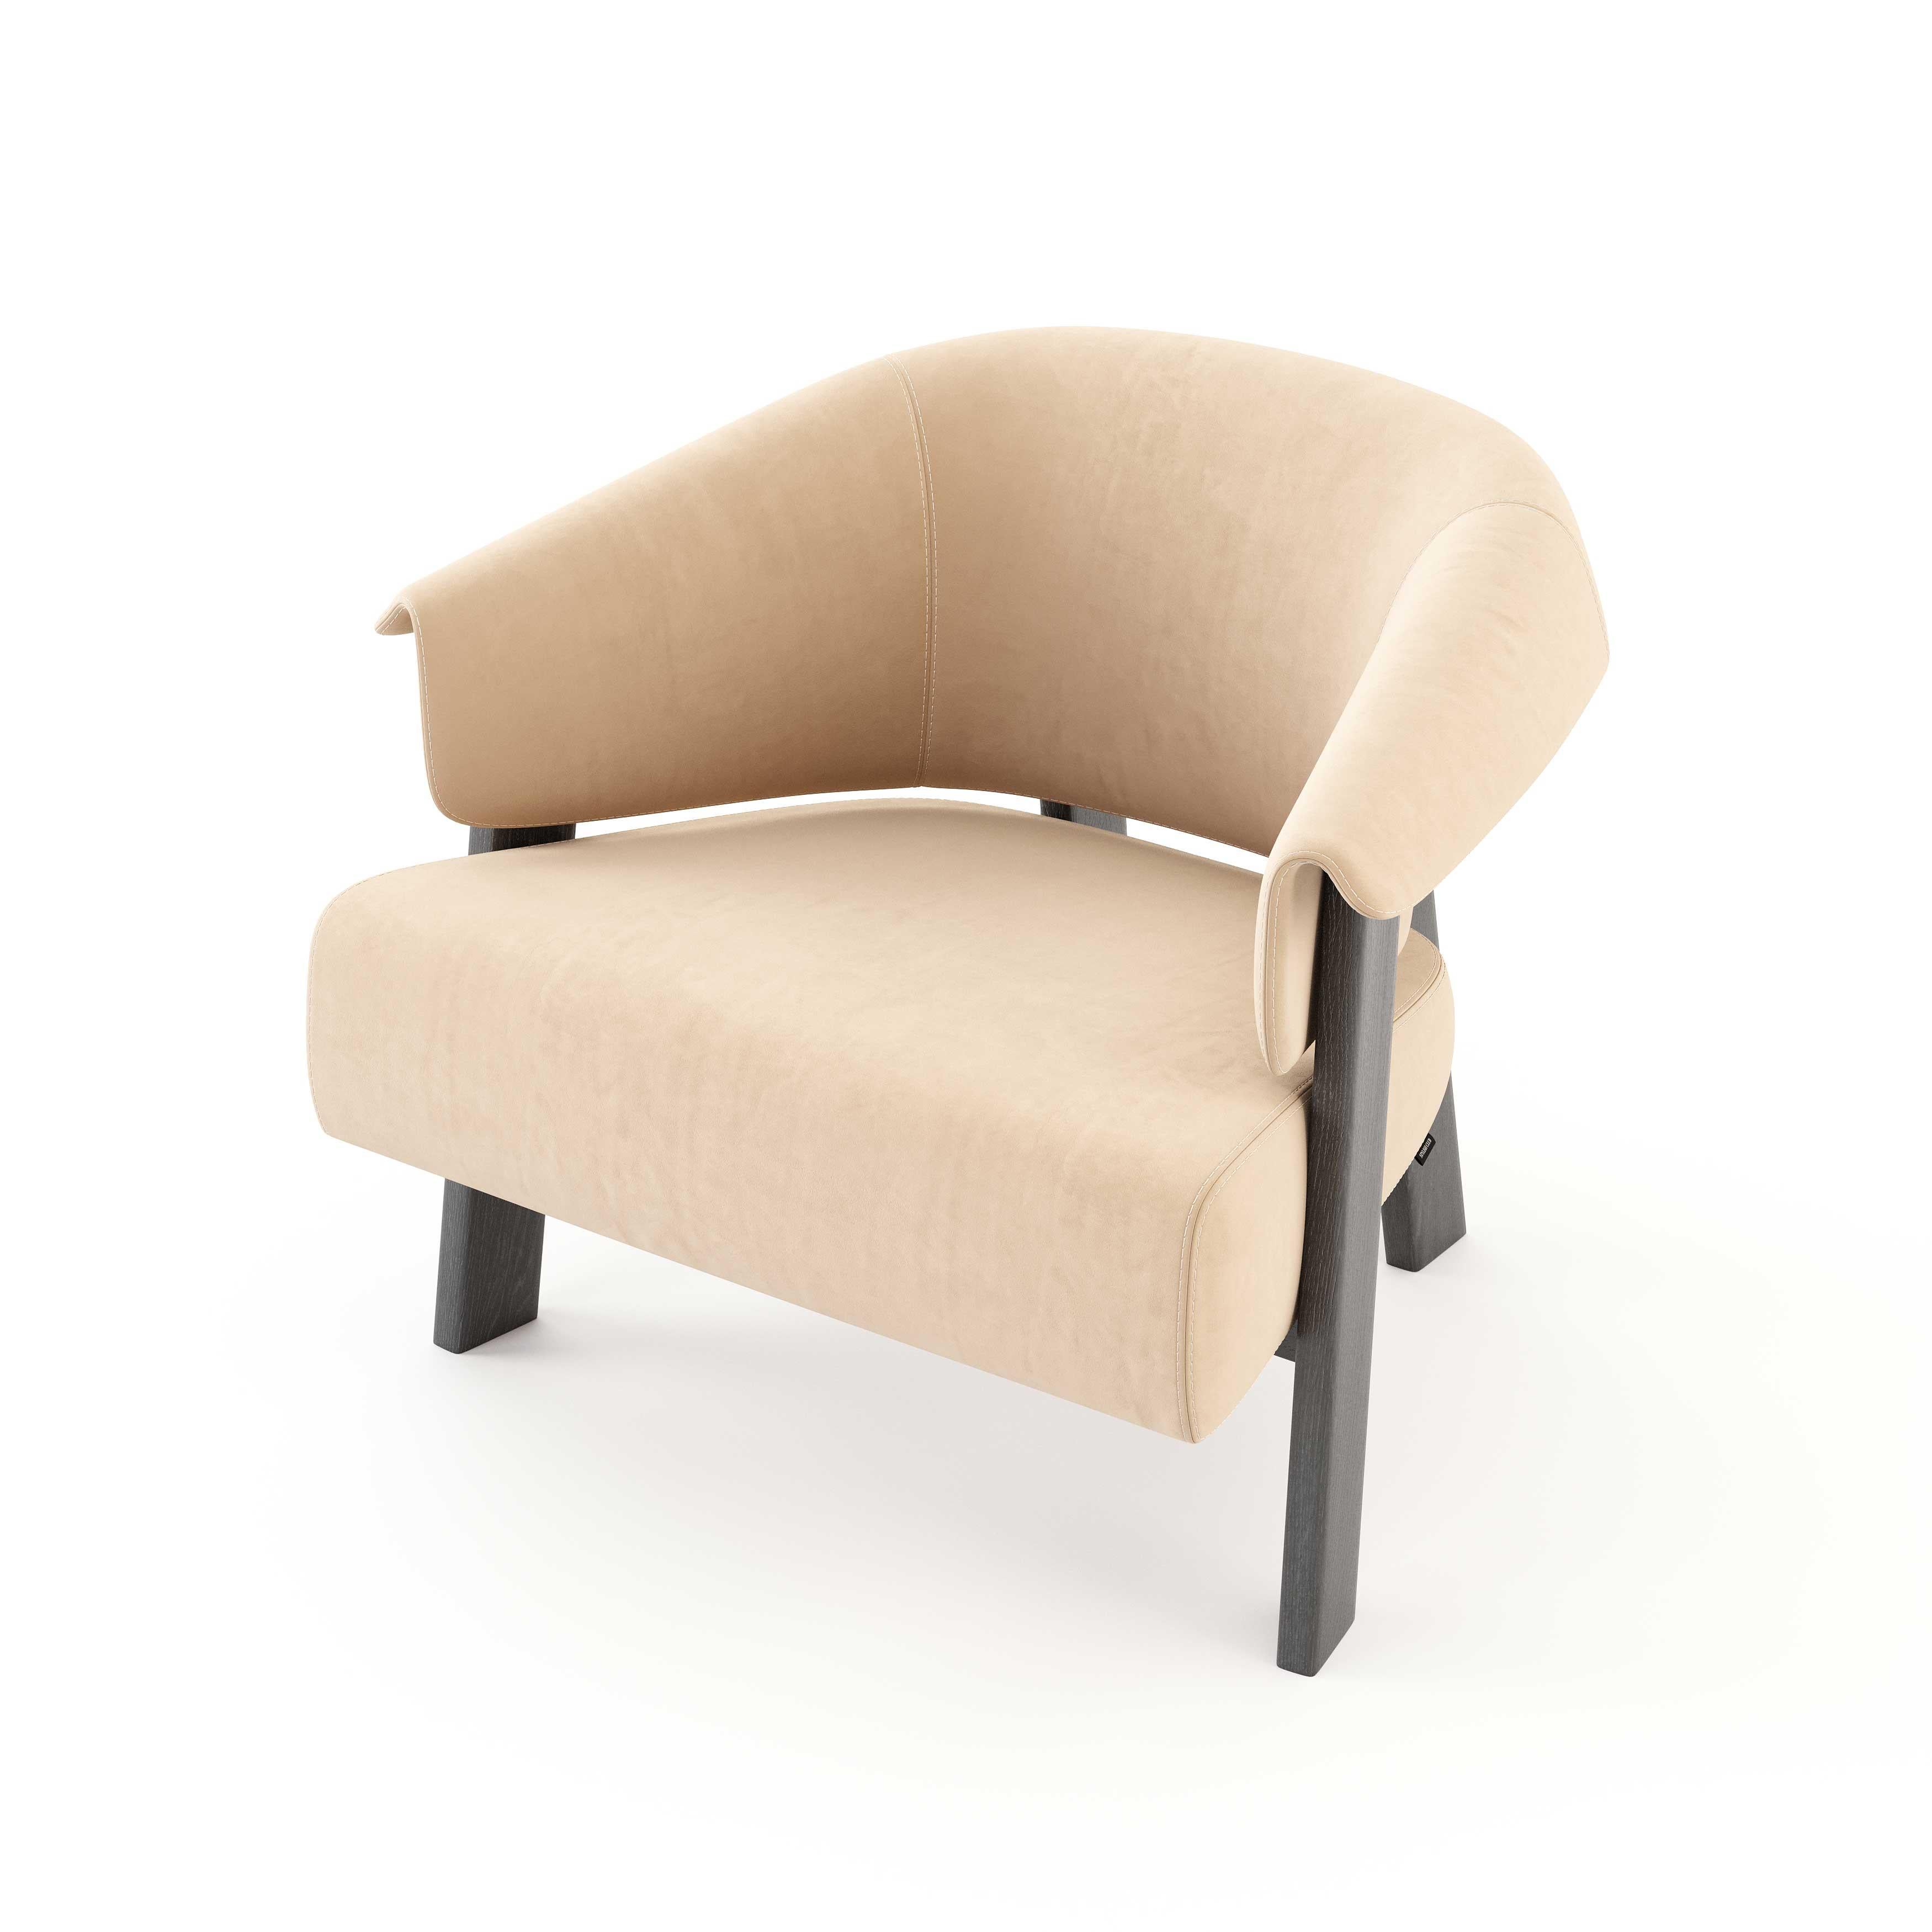 Hand-Crafted Modern Toro Armchair made with oak and suede, Handmade by Stylish Club For Sale